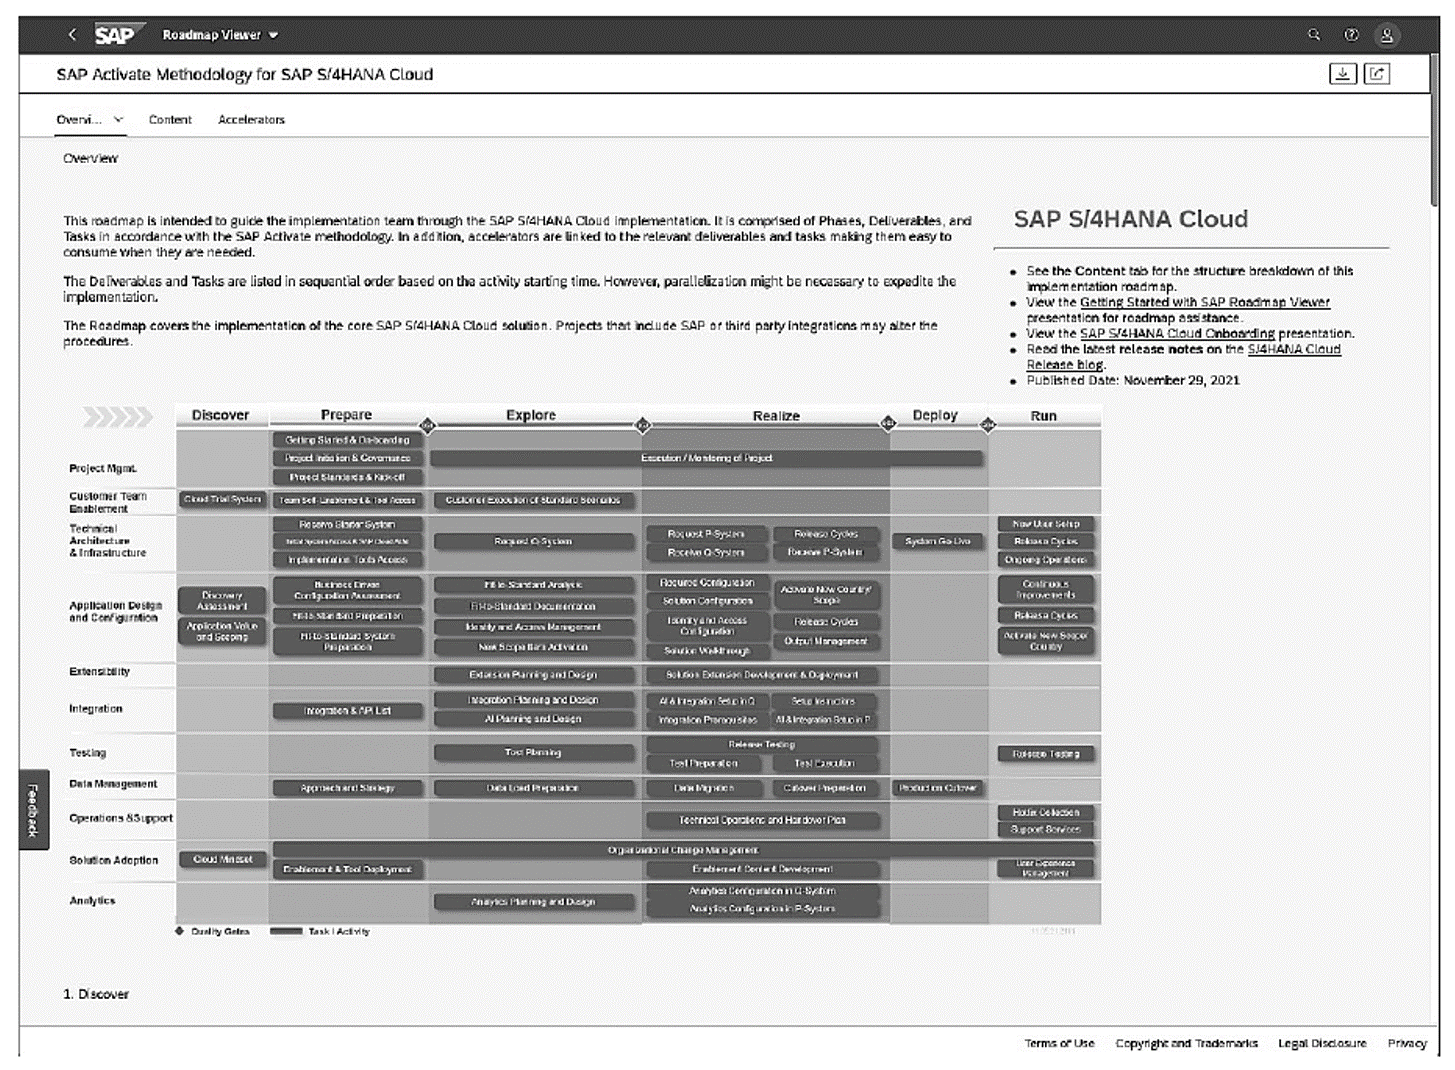 Overview Page for the SAP Activate Methodology for SAP S/4HANA Cloud